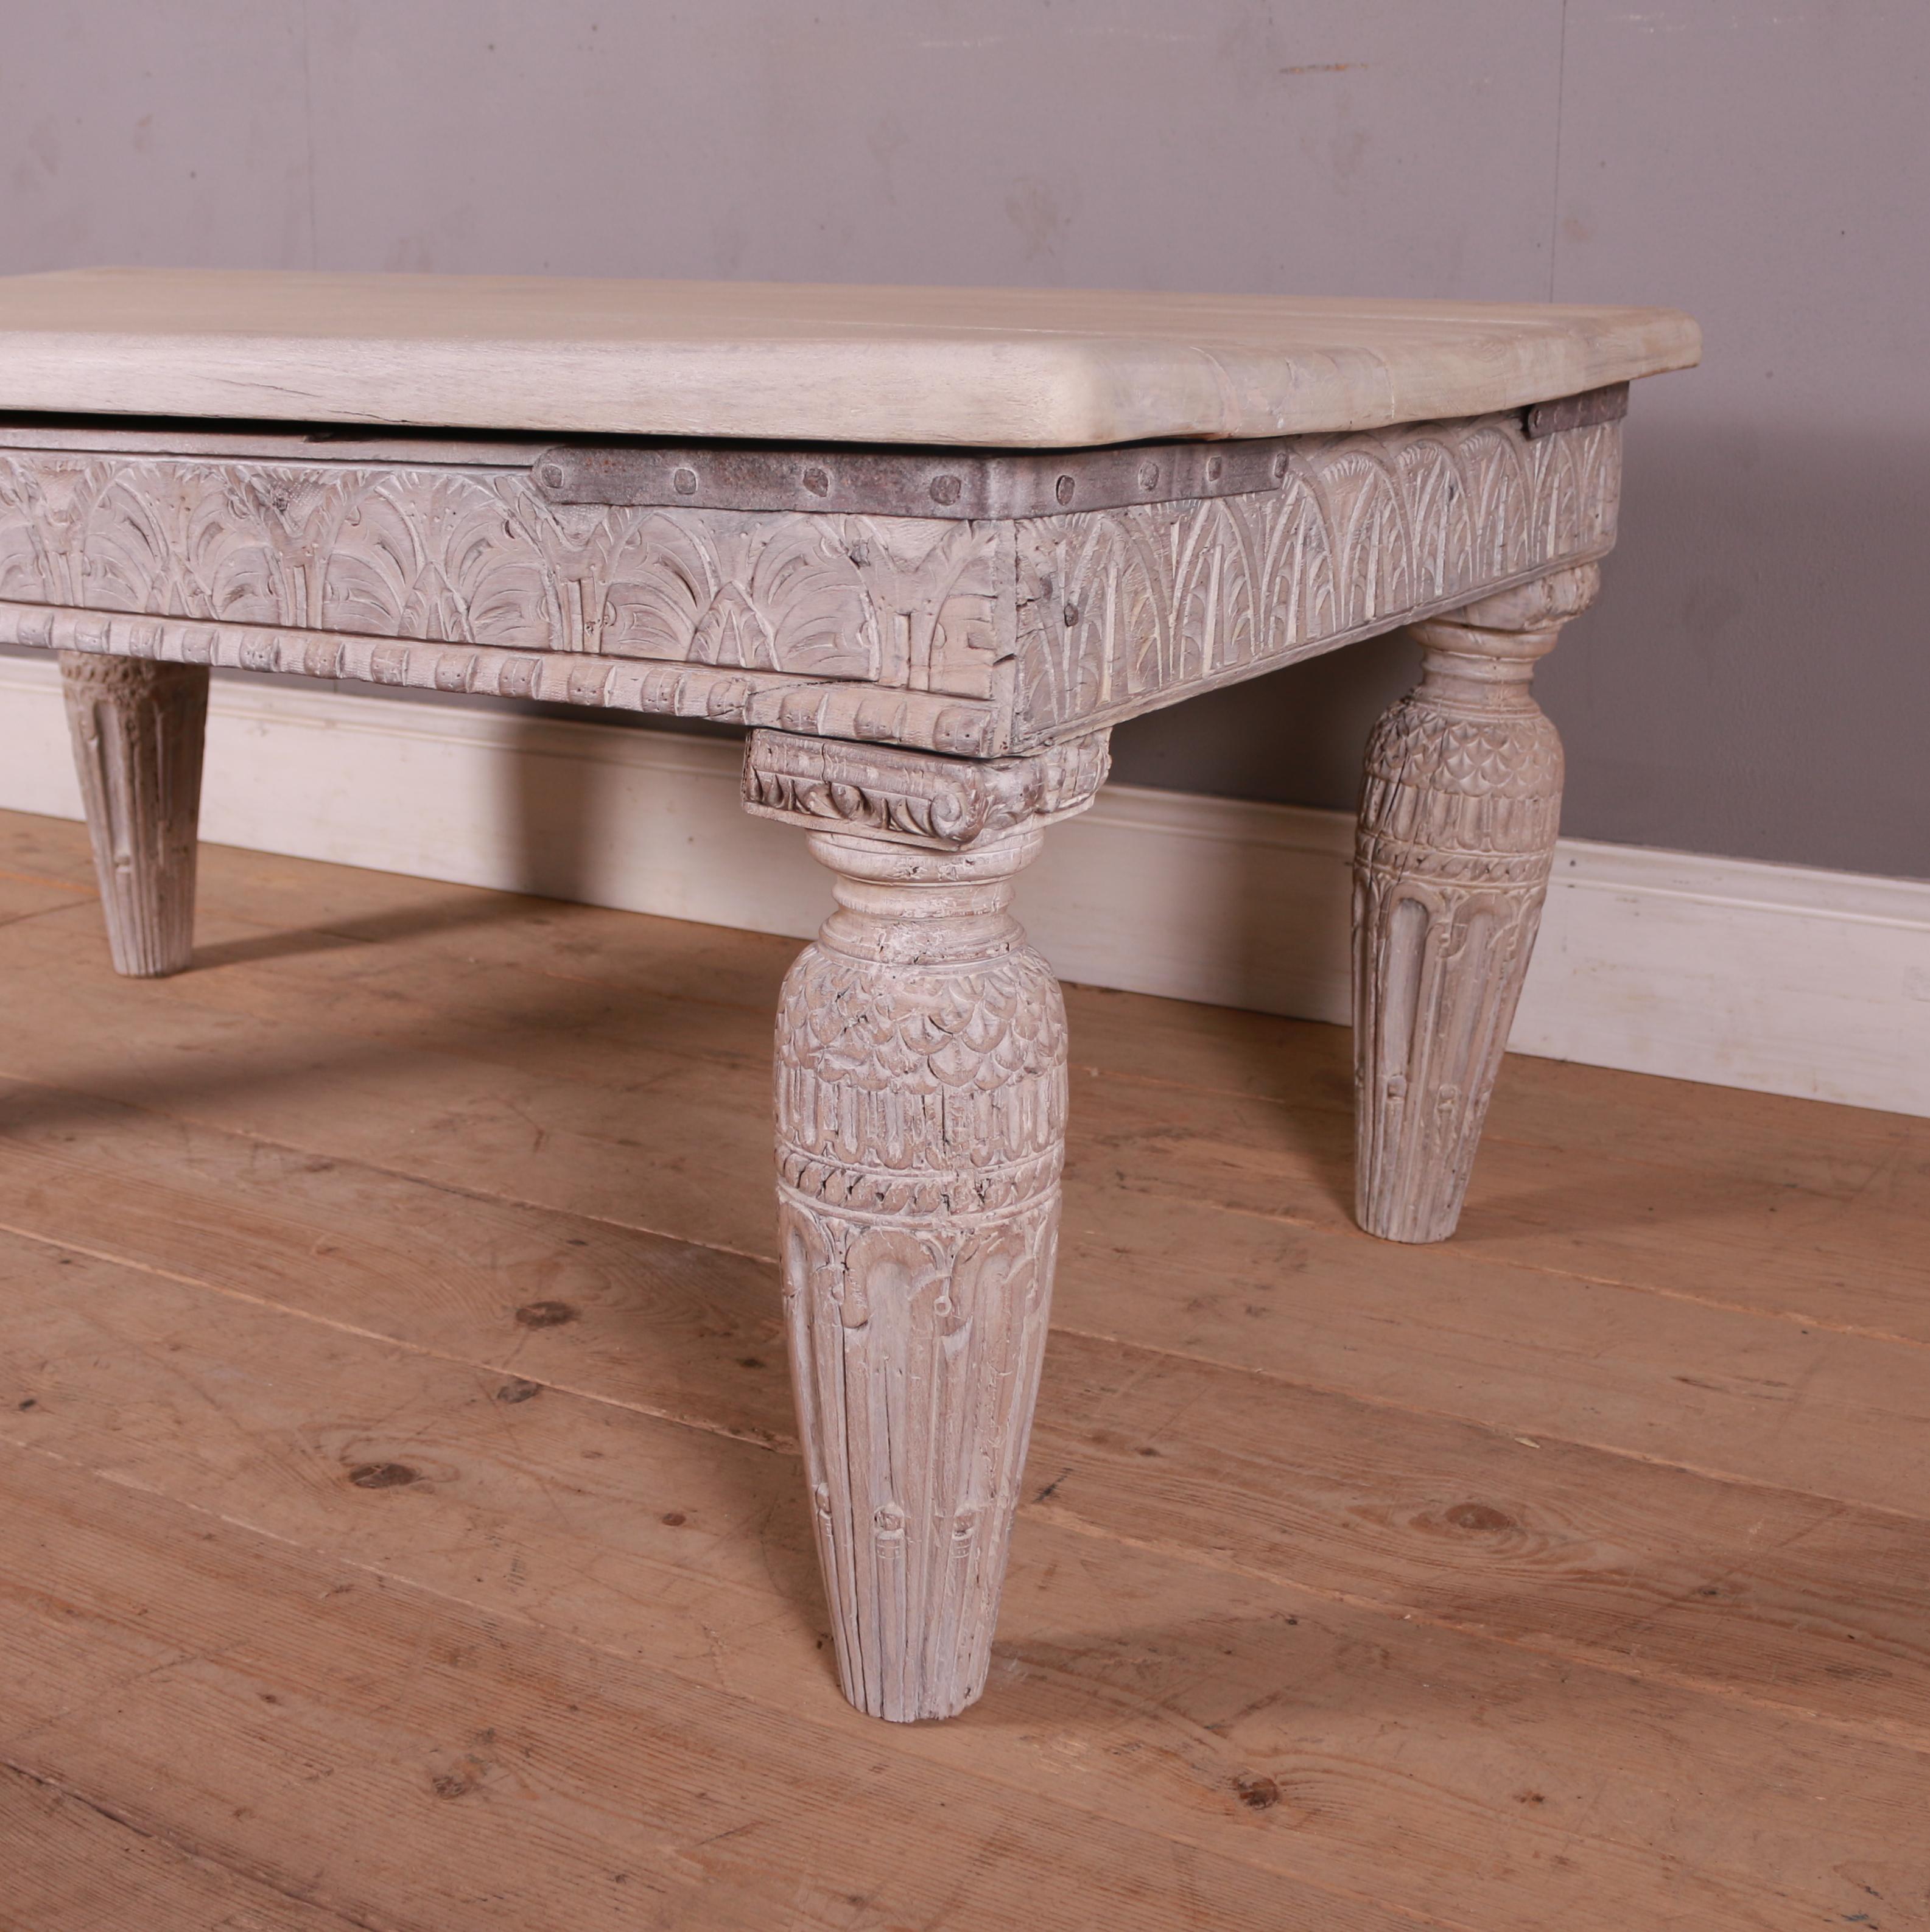 Unusual early 19th C English bleached oak coffee table. 1820.

Reference: 7548

Dimensions
54 inches (137 cms) Wide
32.5 inches (83 cms) Deep
23.5 inches (60 cms) High.